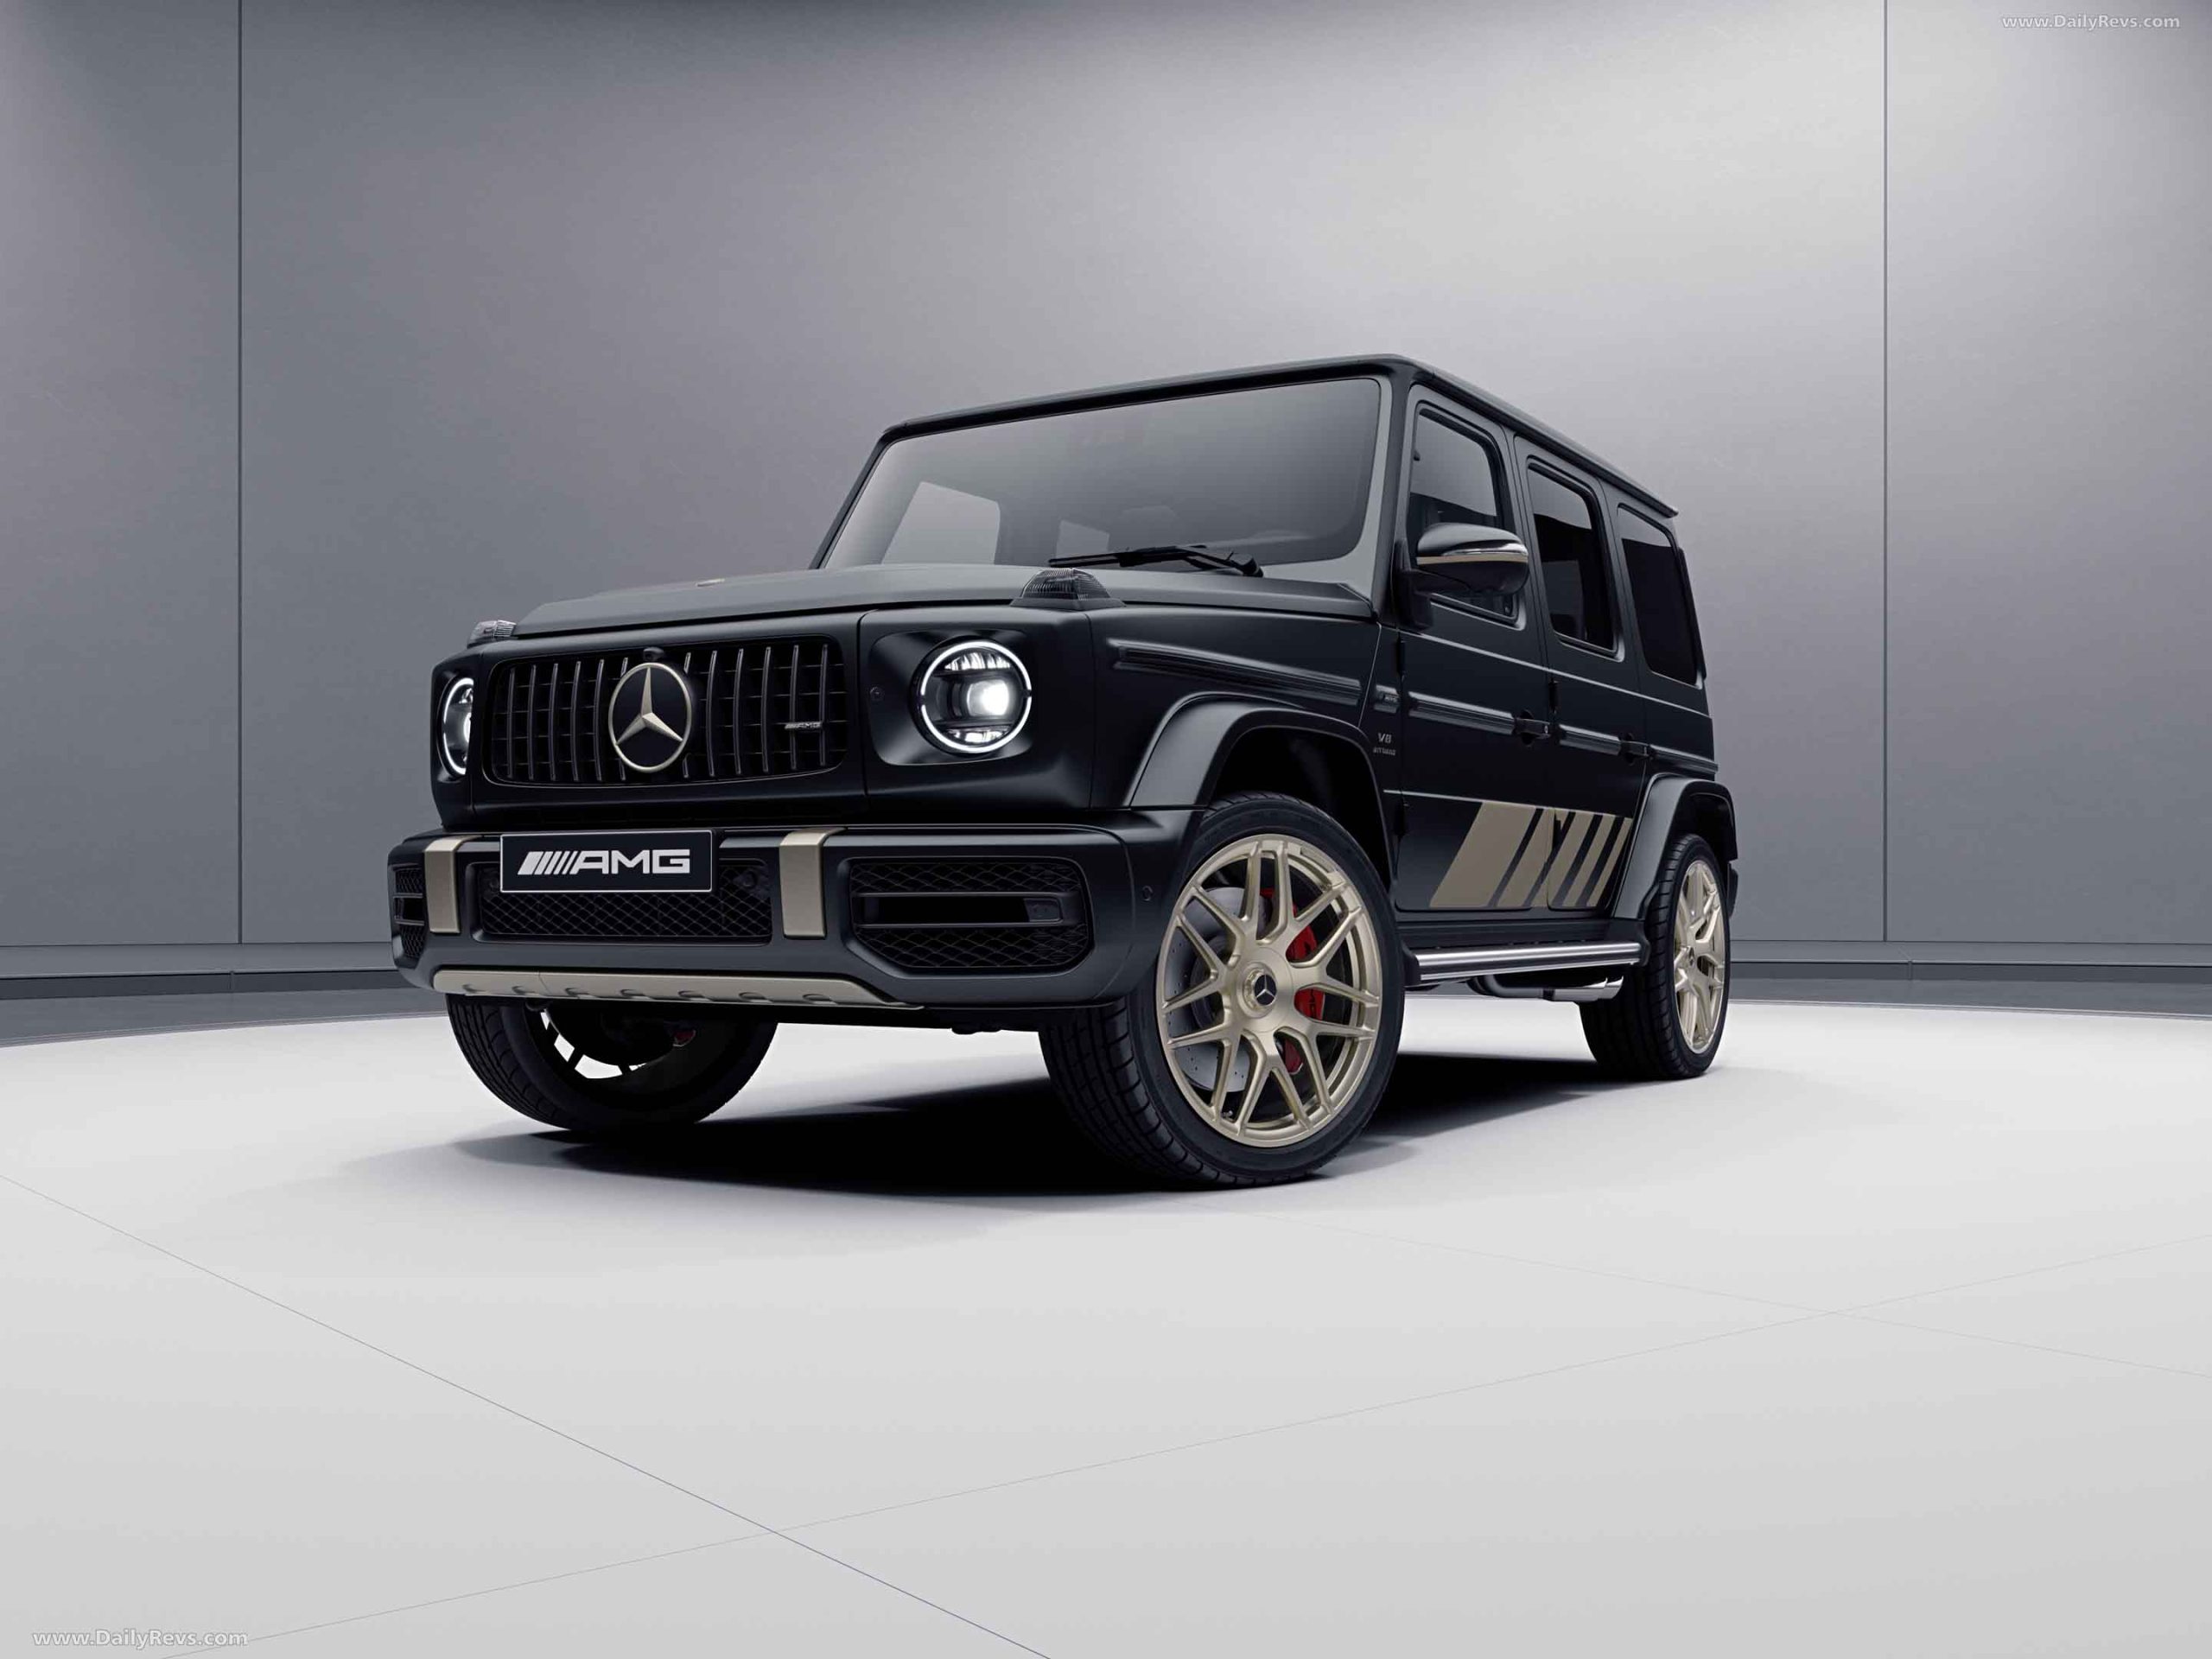 Introducing the Mercedes-AMG G 63 “Grand Edition”